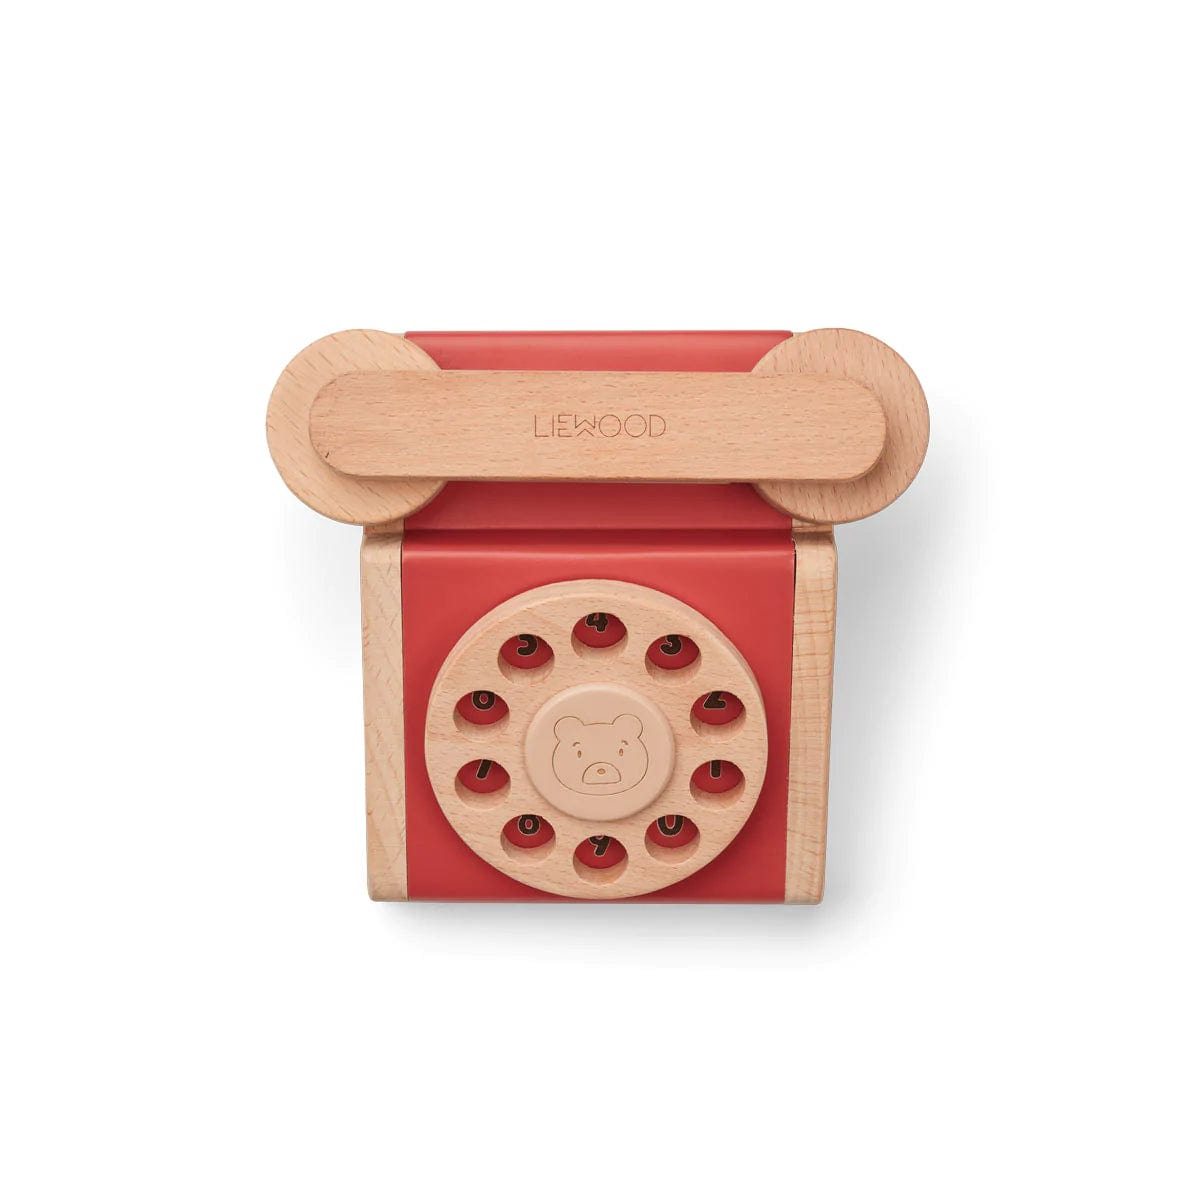 Liewood Toy Phone Liewood Selma Classic Phone (Pale Tuscany / Apple Red)